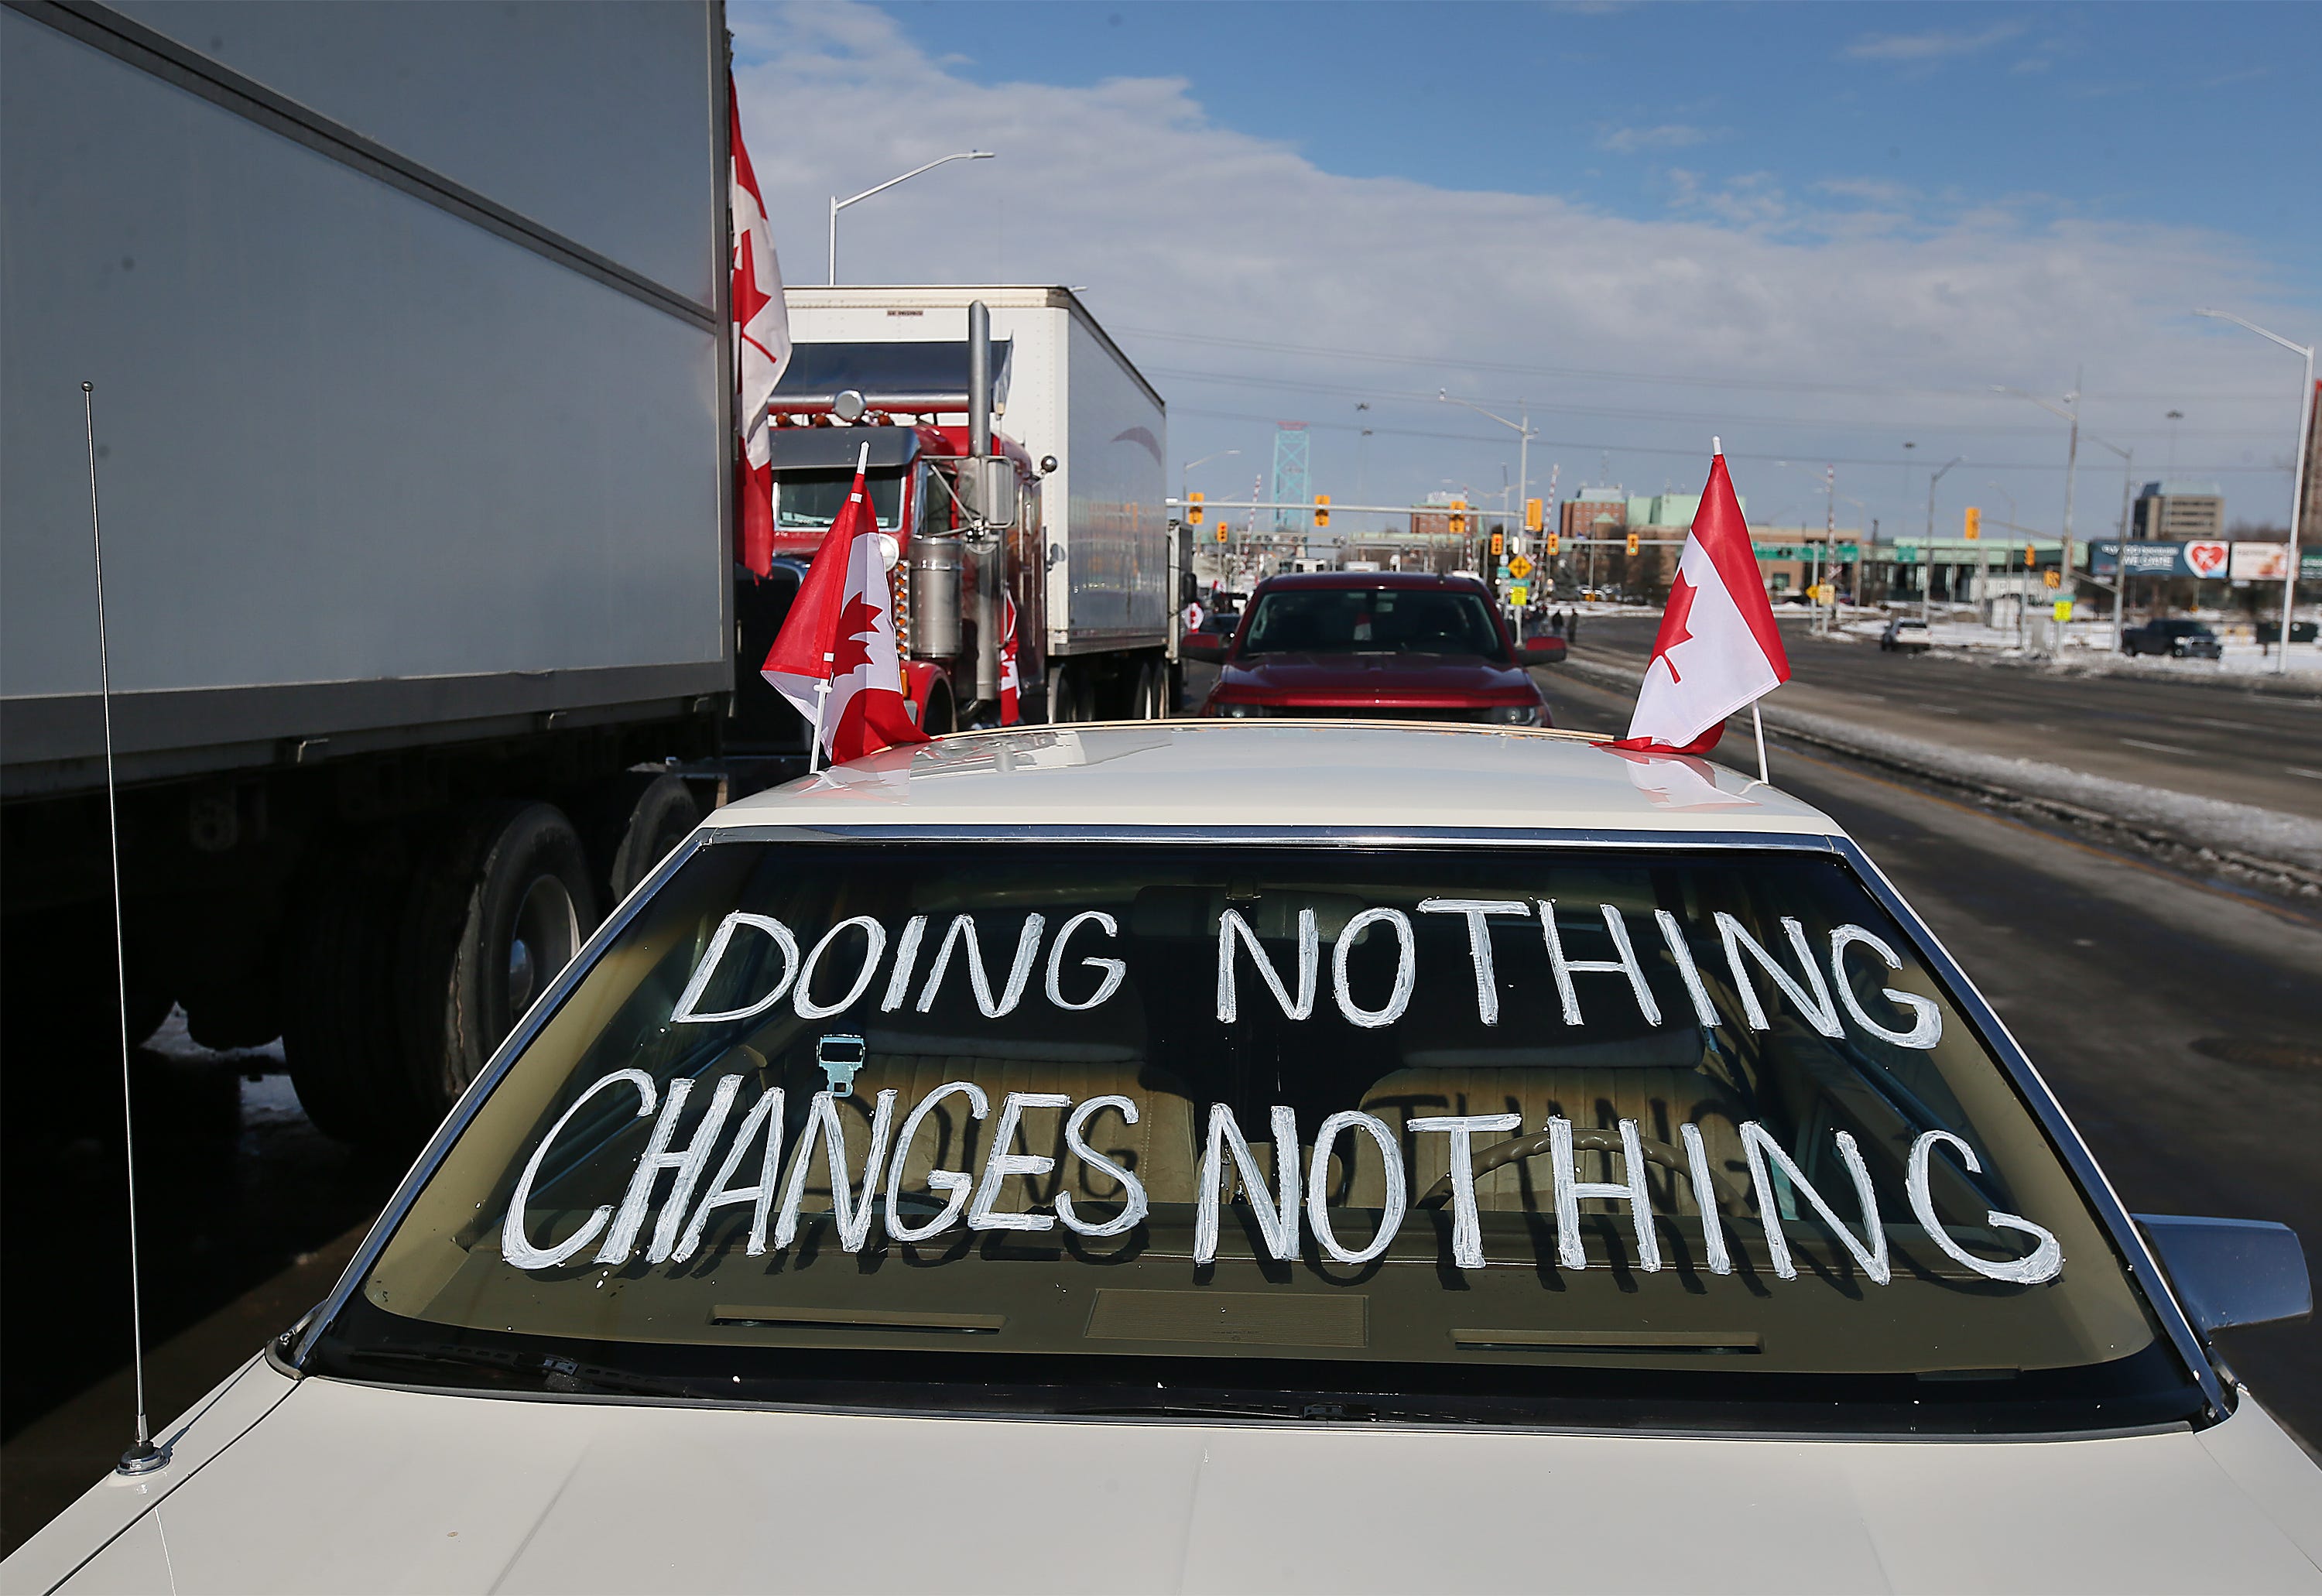 A vehicle parked among the protestors near the Ambassador Bridge in Windsor is shown on Wednesday, February 9, 2022.